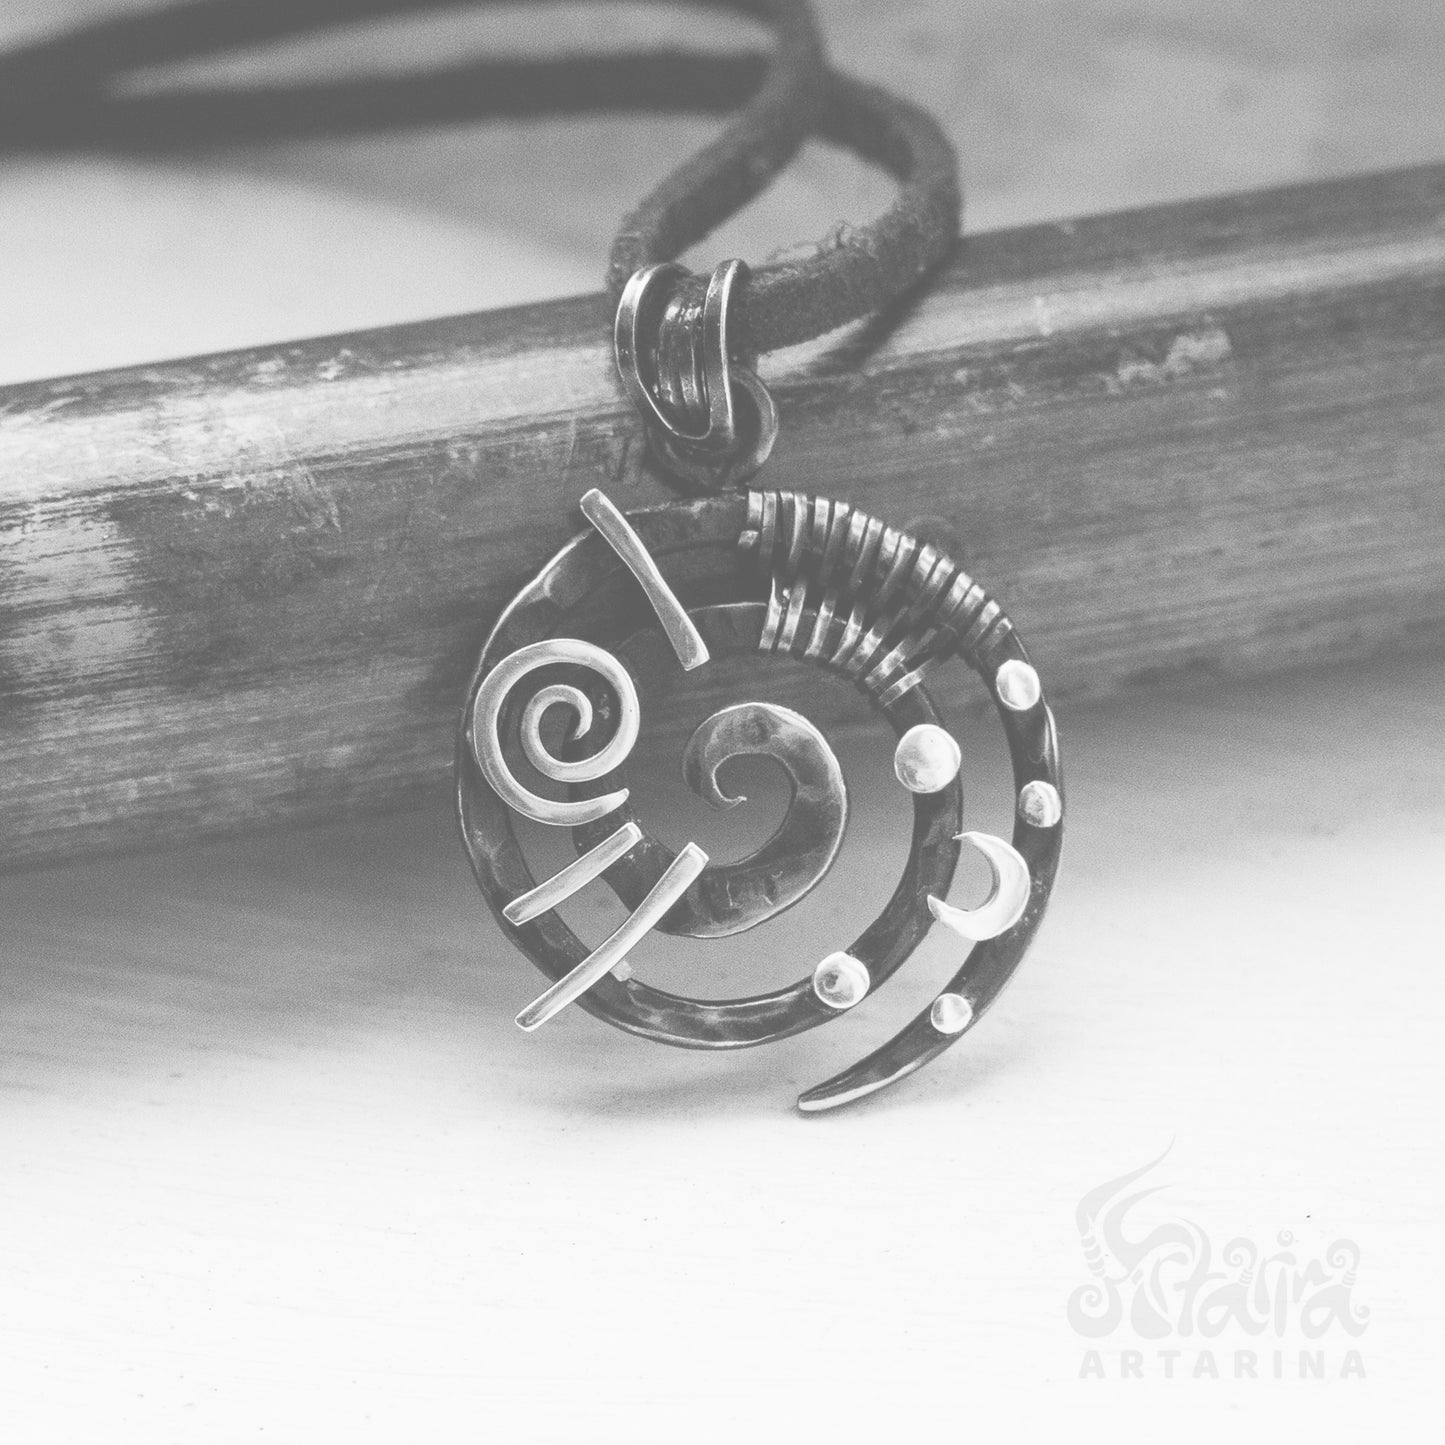 Sun and Moon wire wrapped spiral necklace